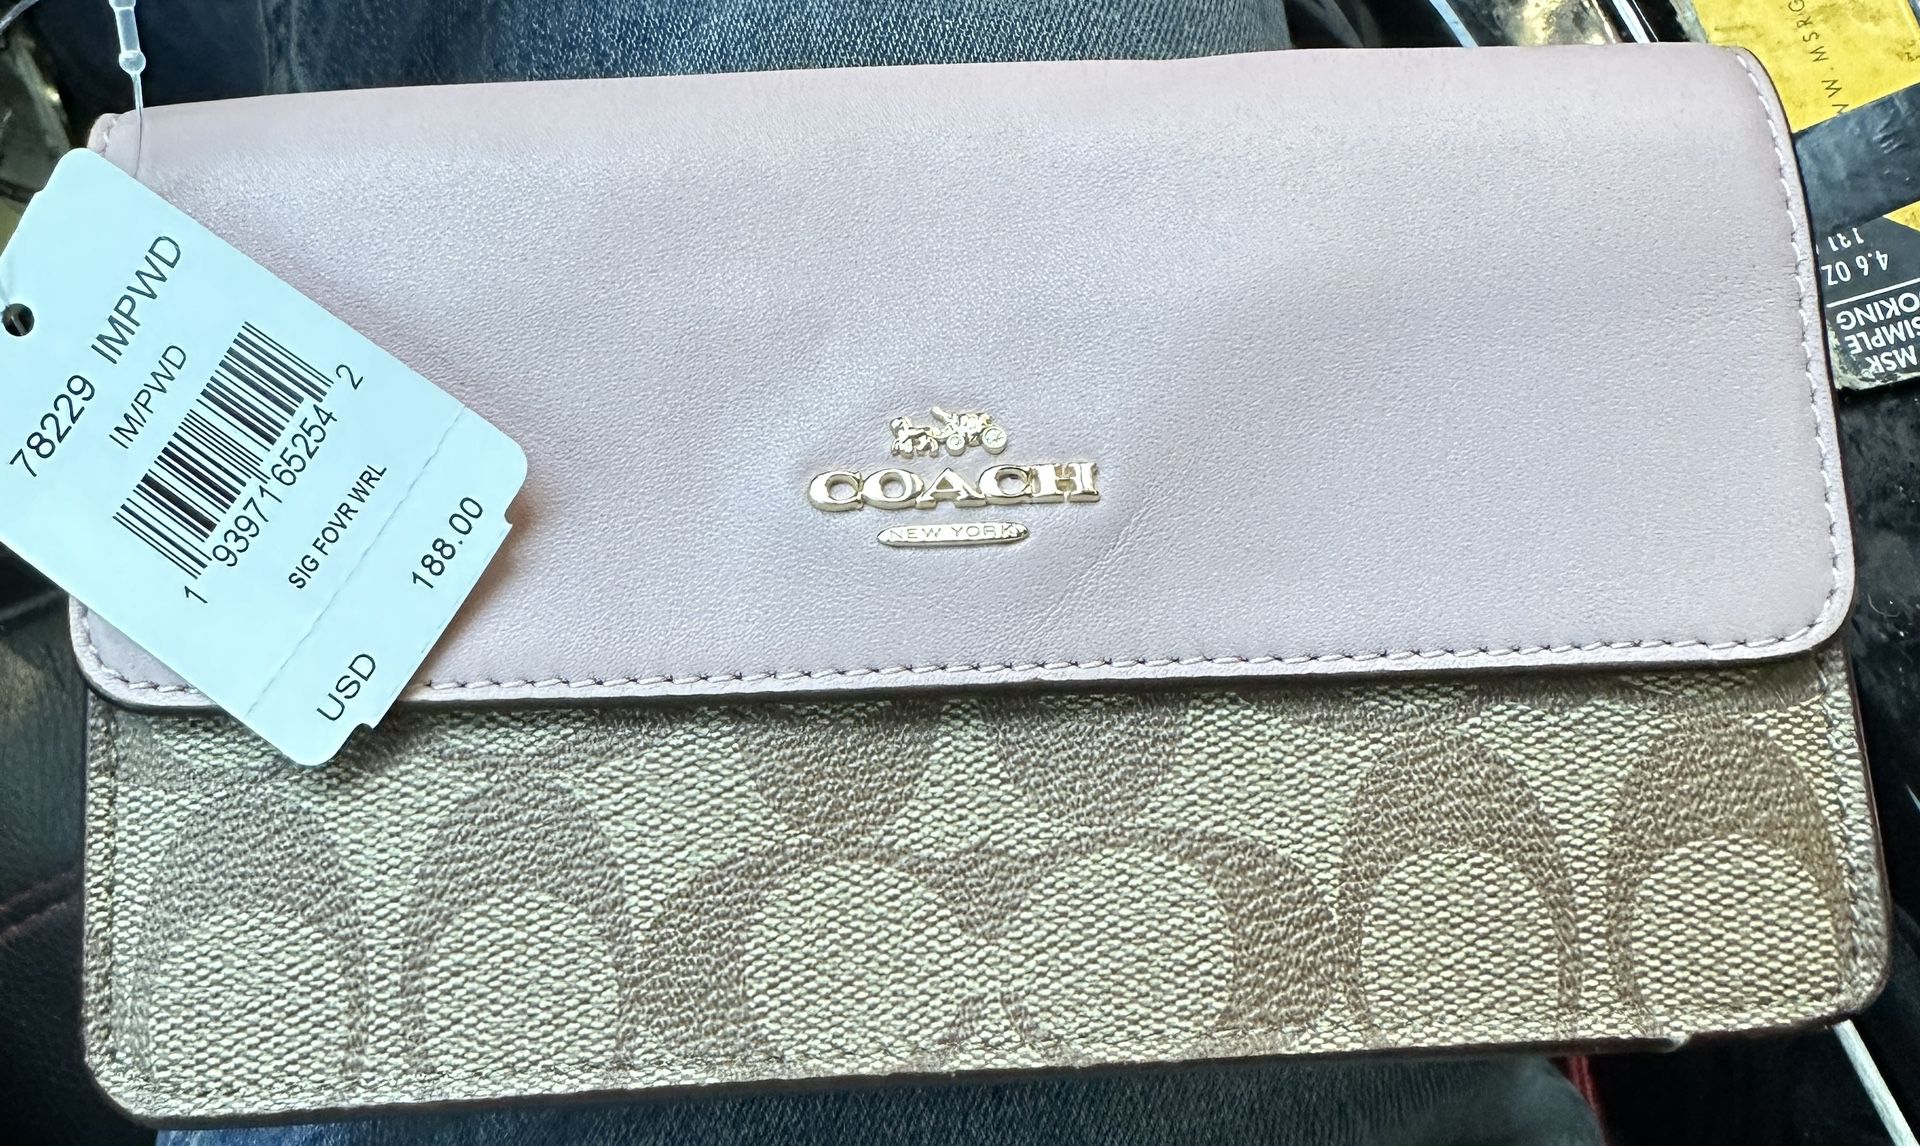 New With Tags Genuine Coach Wallet Retails For $188